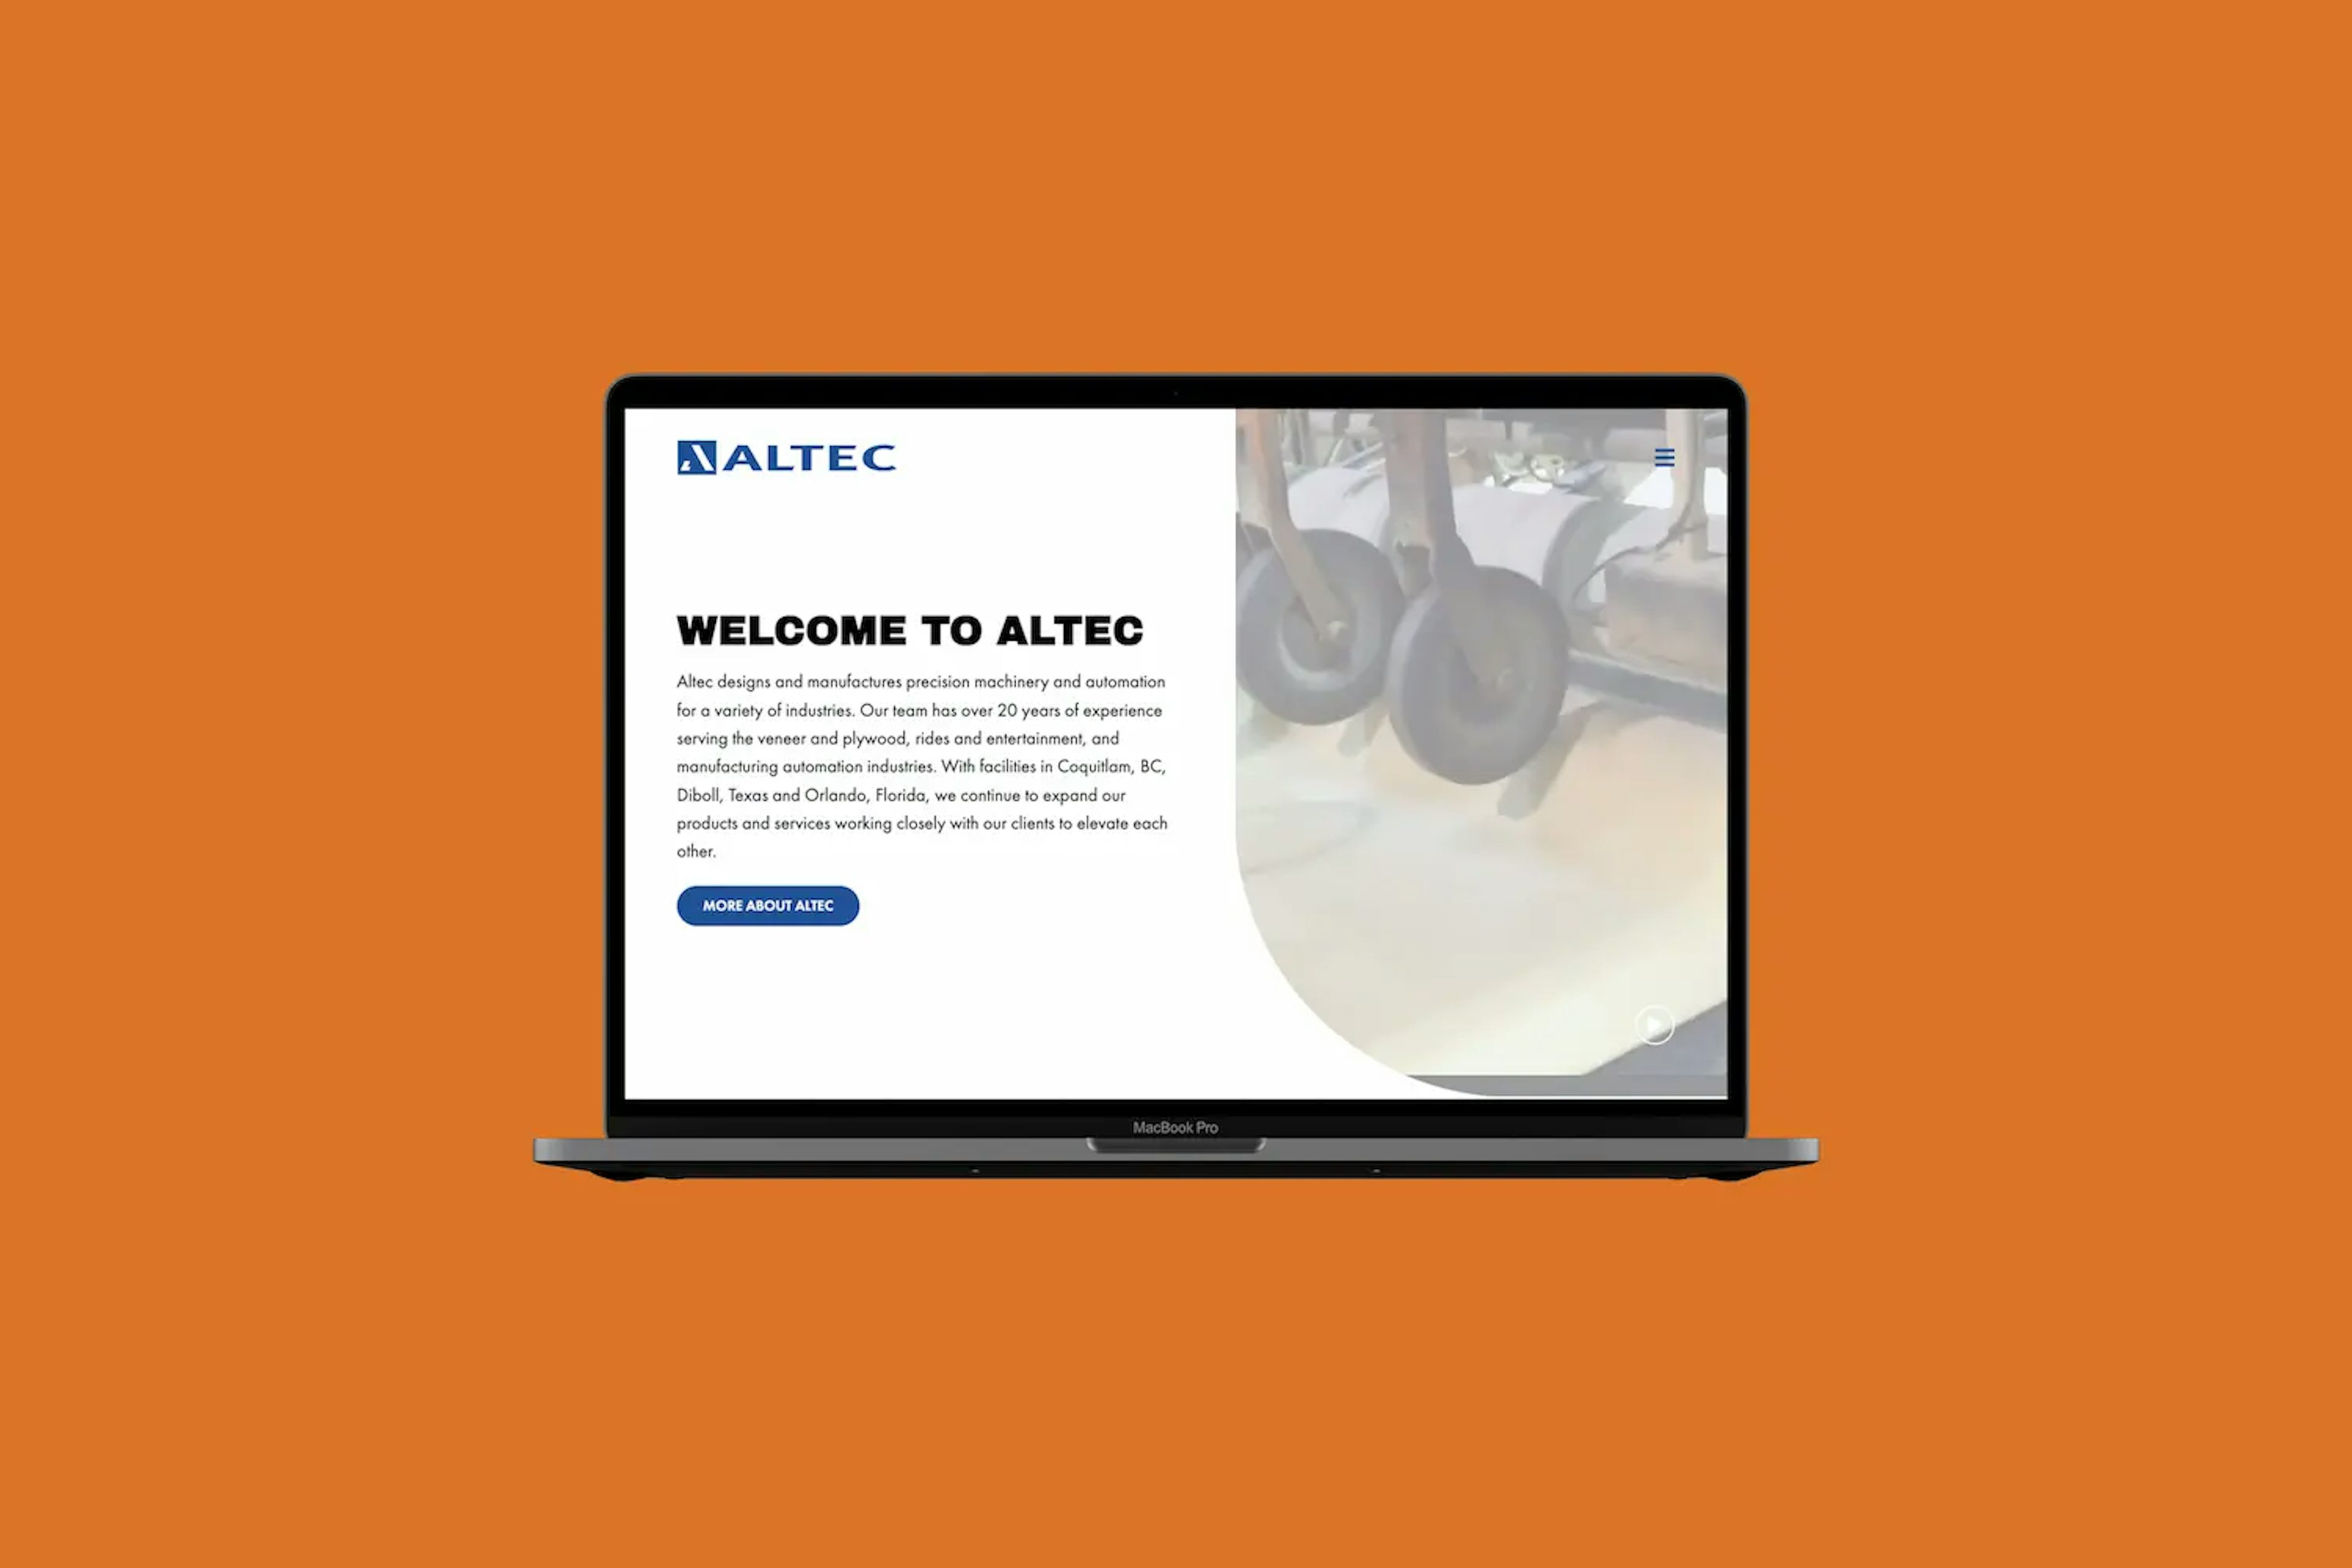 Web design that reflects the many faces of Altec